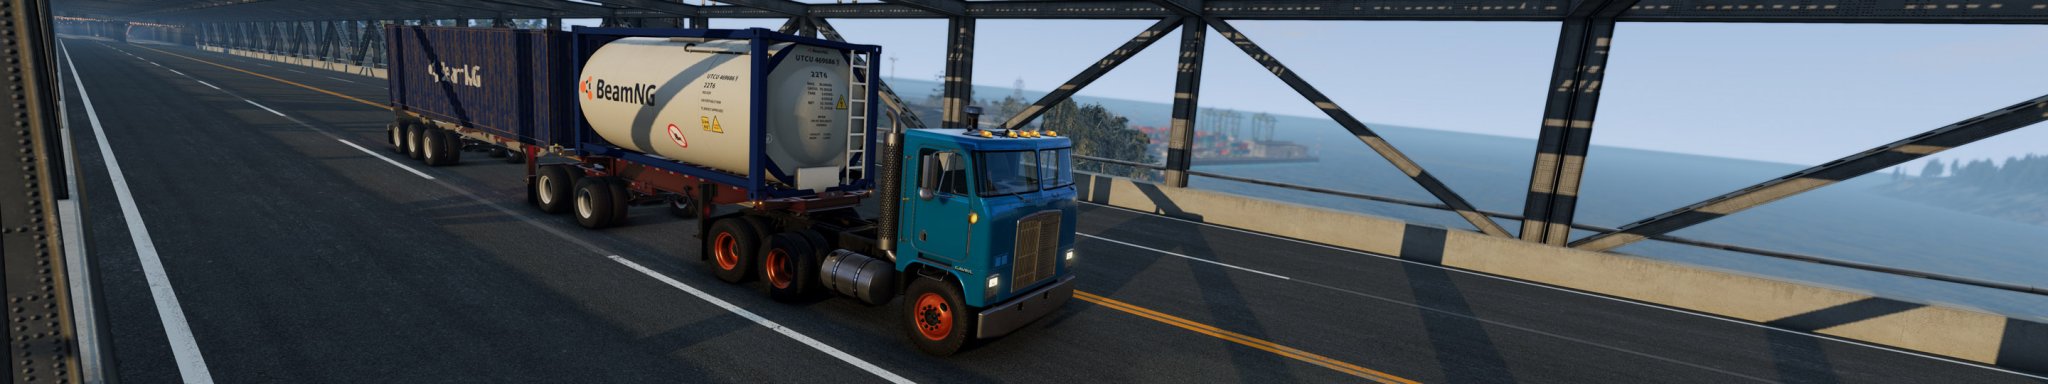 3 BeamNG GAVRIL TC83 BASE Towing 2 Traliers copy.jpg